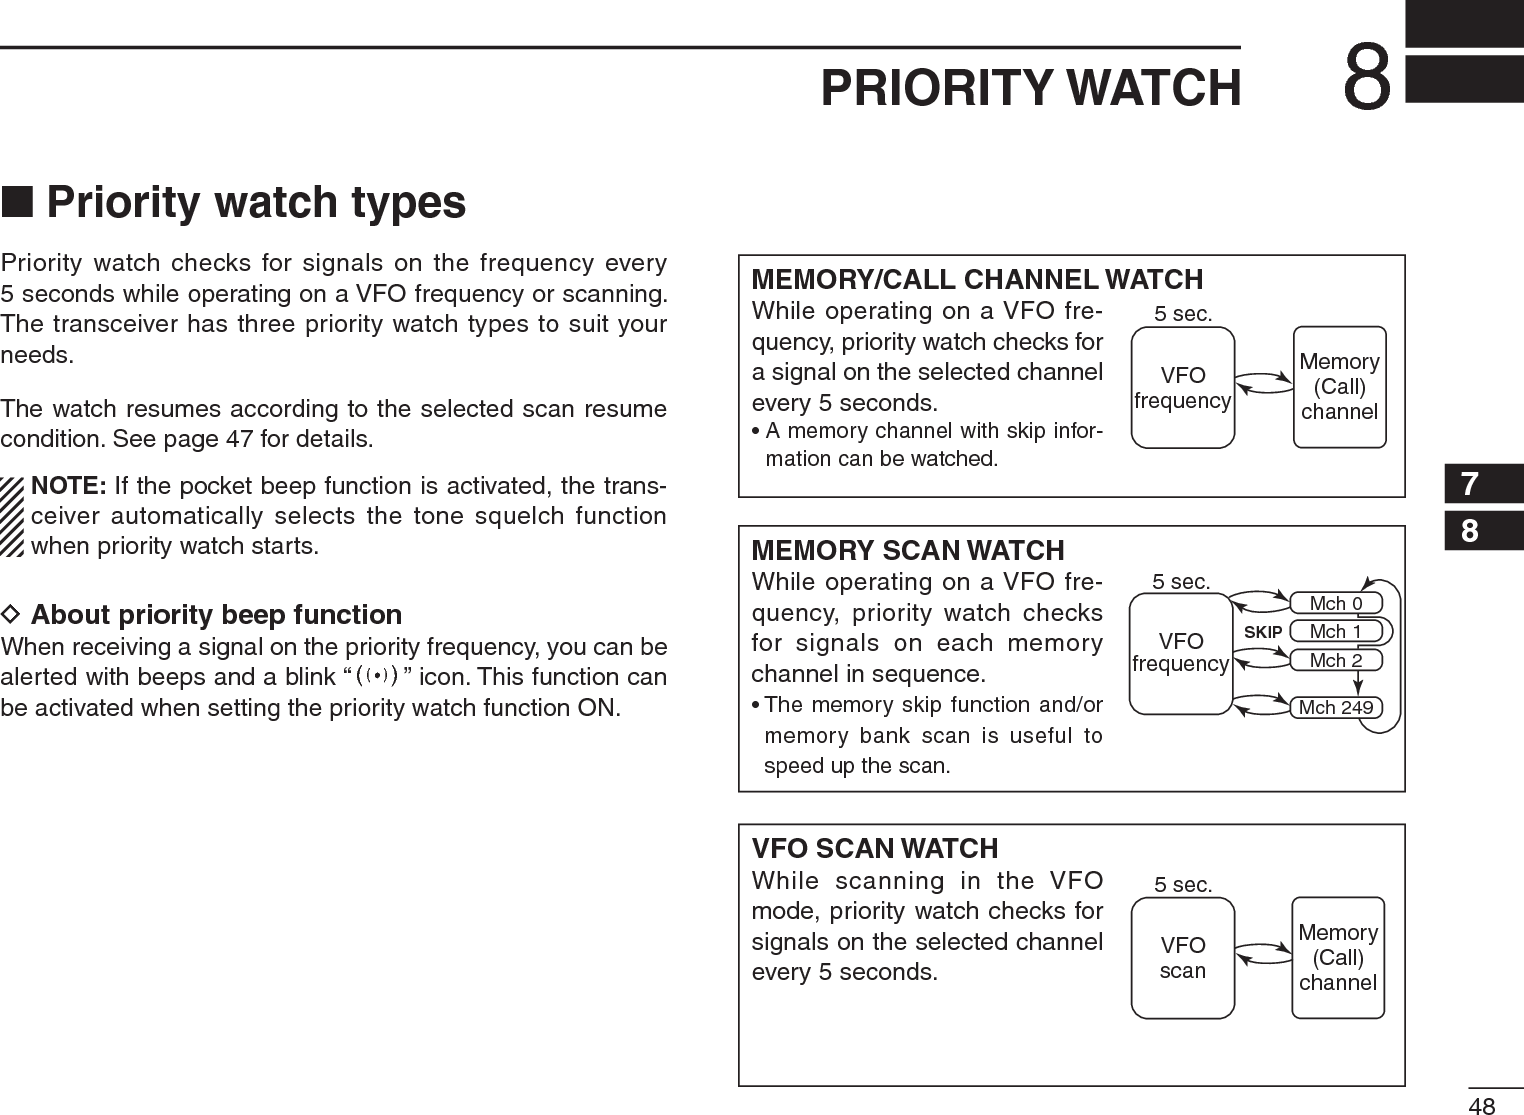 488PRIORITY WATCH12345678910111213141516171819N Priority watch typesPriority watch checks for signals on the frequency every 5 seconds while operating on a VFO frequency or scanning. The transceiver has three priority watch types to suit your needs.The watch resumes according to the selected scan resume condition. See page 47 for details.NOTE: If the pocket beep function is activated, the trans-ceiver automatically selects the tone squelch function when priority watch starts.D About priority beep functionWhen receiving a signal on the priority frequency, you can be alerted with beeps and a blink “S” icon. This function can be activated when setting the priority watch function ON.MEMORY/CALL CHANNEL WATCHWhile operating on a VFO fre-quency, priority watch checks for a signal on the selected channel every 5 seconds.• A memory channel with skip infor-mation can be watched.MEMORY SCAN WATCHWhile operating on a VFO fre-quency, priority watch checks for signals on each memory channel in sequence.• The memory skip function and/or memory bank scan is useful to speed up the scan.VFO SCAN WATCHWhile scanning in the VFO mode, priority watch checks for signals on the selected channel every 5 seconds.5 sec.VFOfrequencyMemory(Call)channel5 sec.VFOfrequencySKIPMch 0Mch 1Mch 2Mch 2495 sec.VFOscanMemory(Call)channel